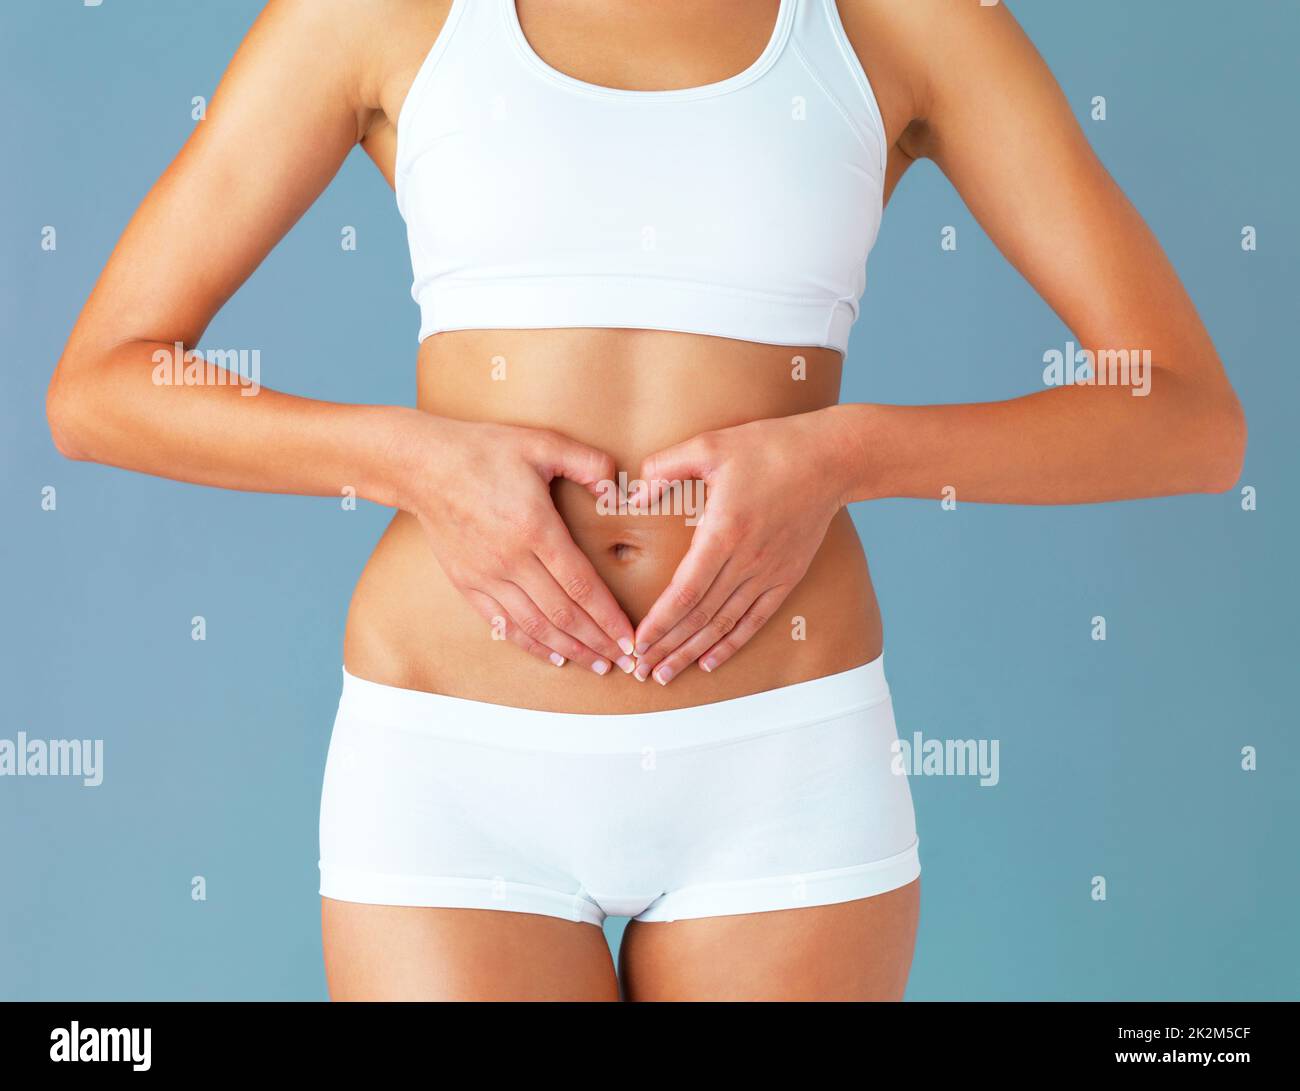 For the greatest wealth, invest in your health. Cropped studio shot of a fit young woman making a heart shaped gesture over her stomach against a blue background. Stock Photo